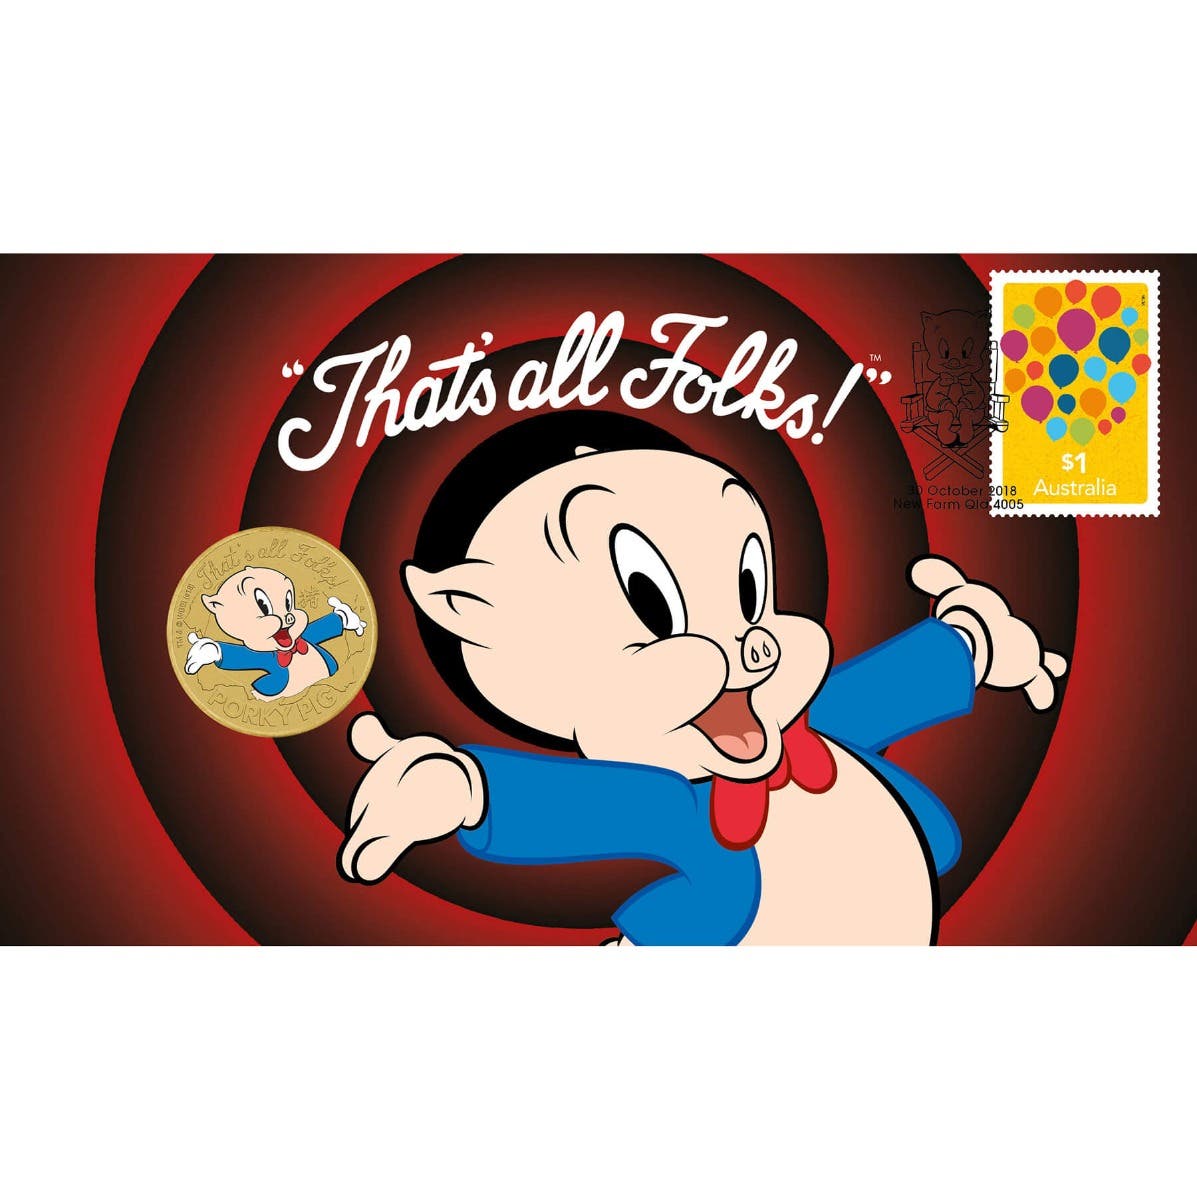 Looney Tunes Porky Pig 2018 $1 Stamp & Coin Cover